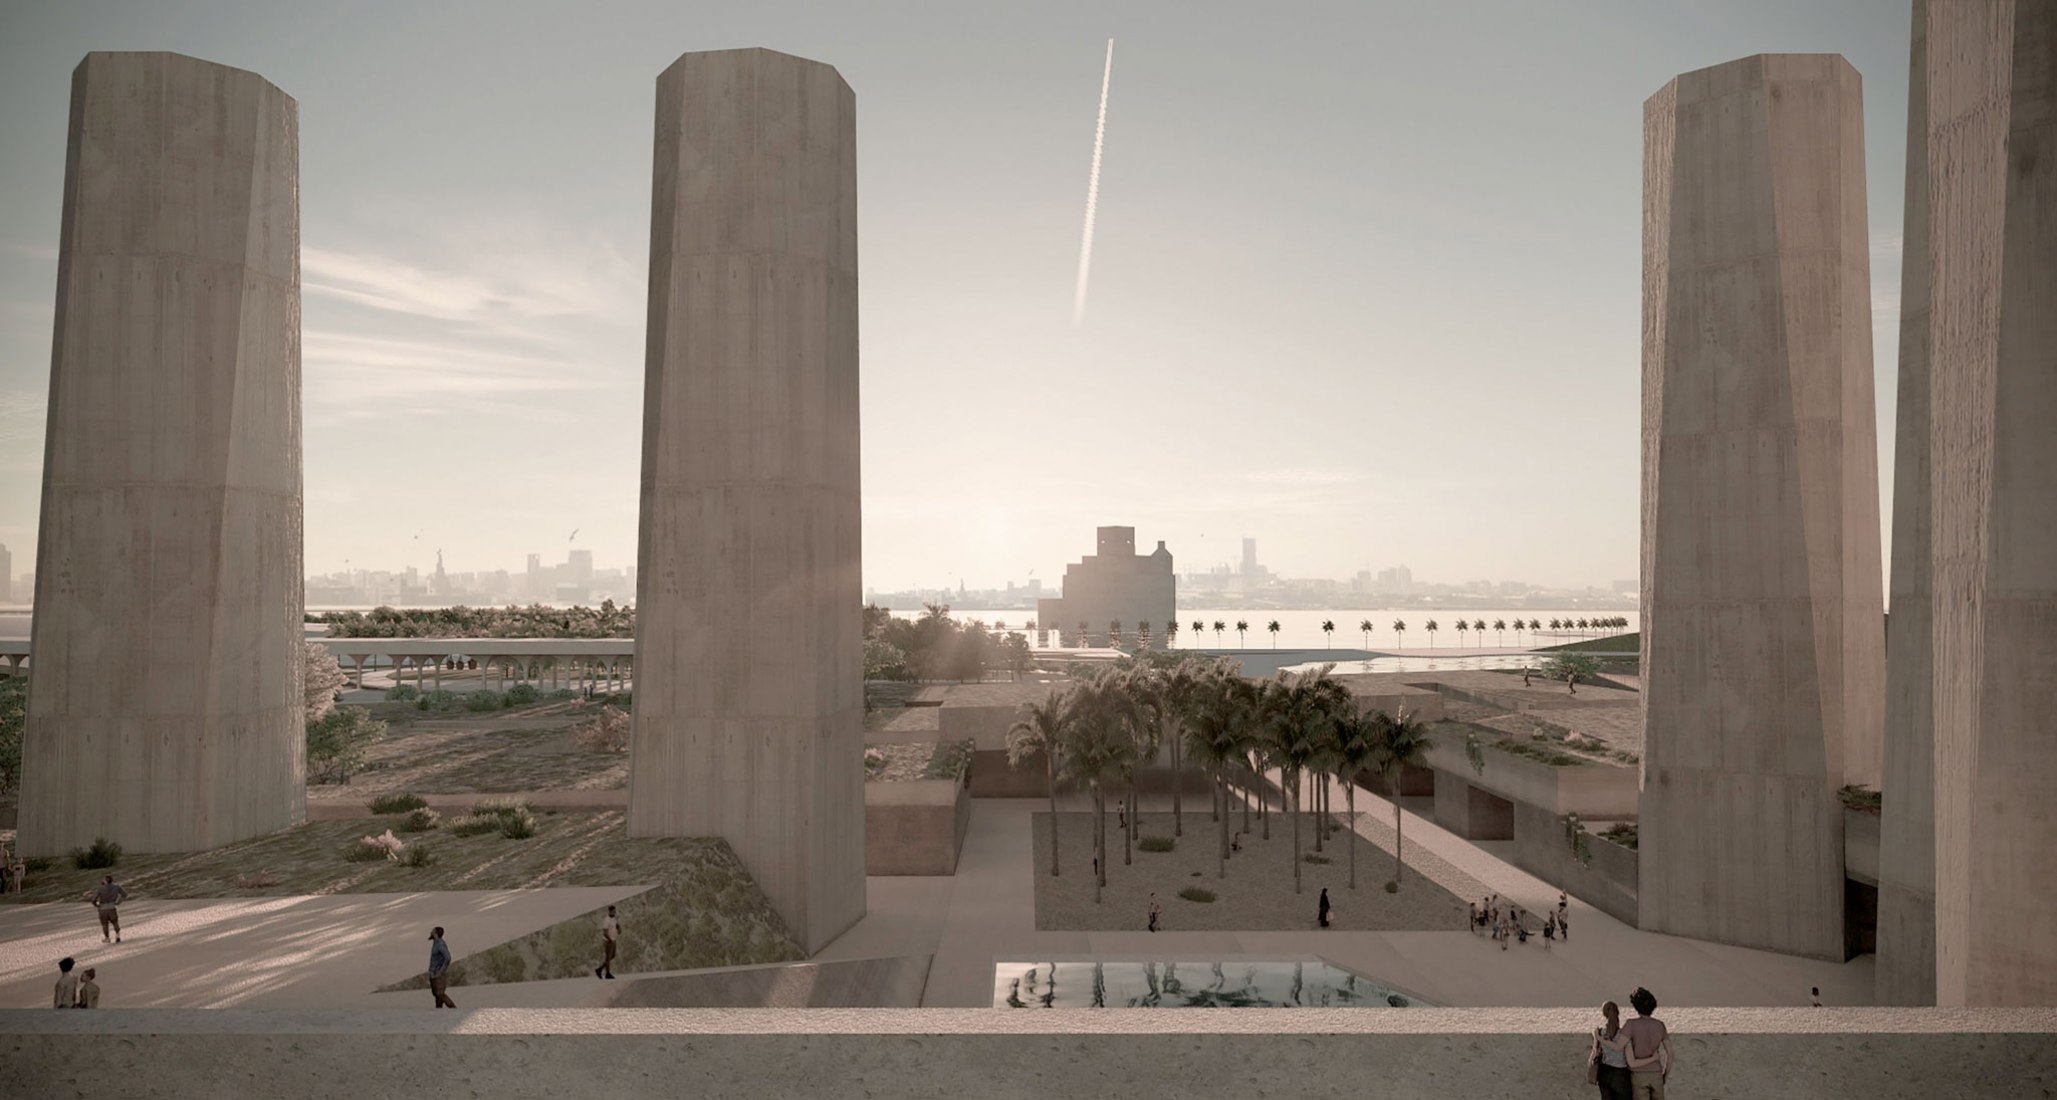 Concept design, view from the South (Doha, Qatar), 2022. Art Mill Museum by Elemental. Image courtesy of Qatar Museums.